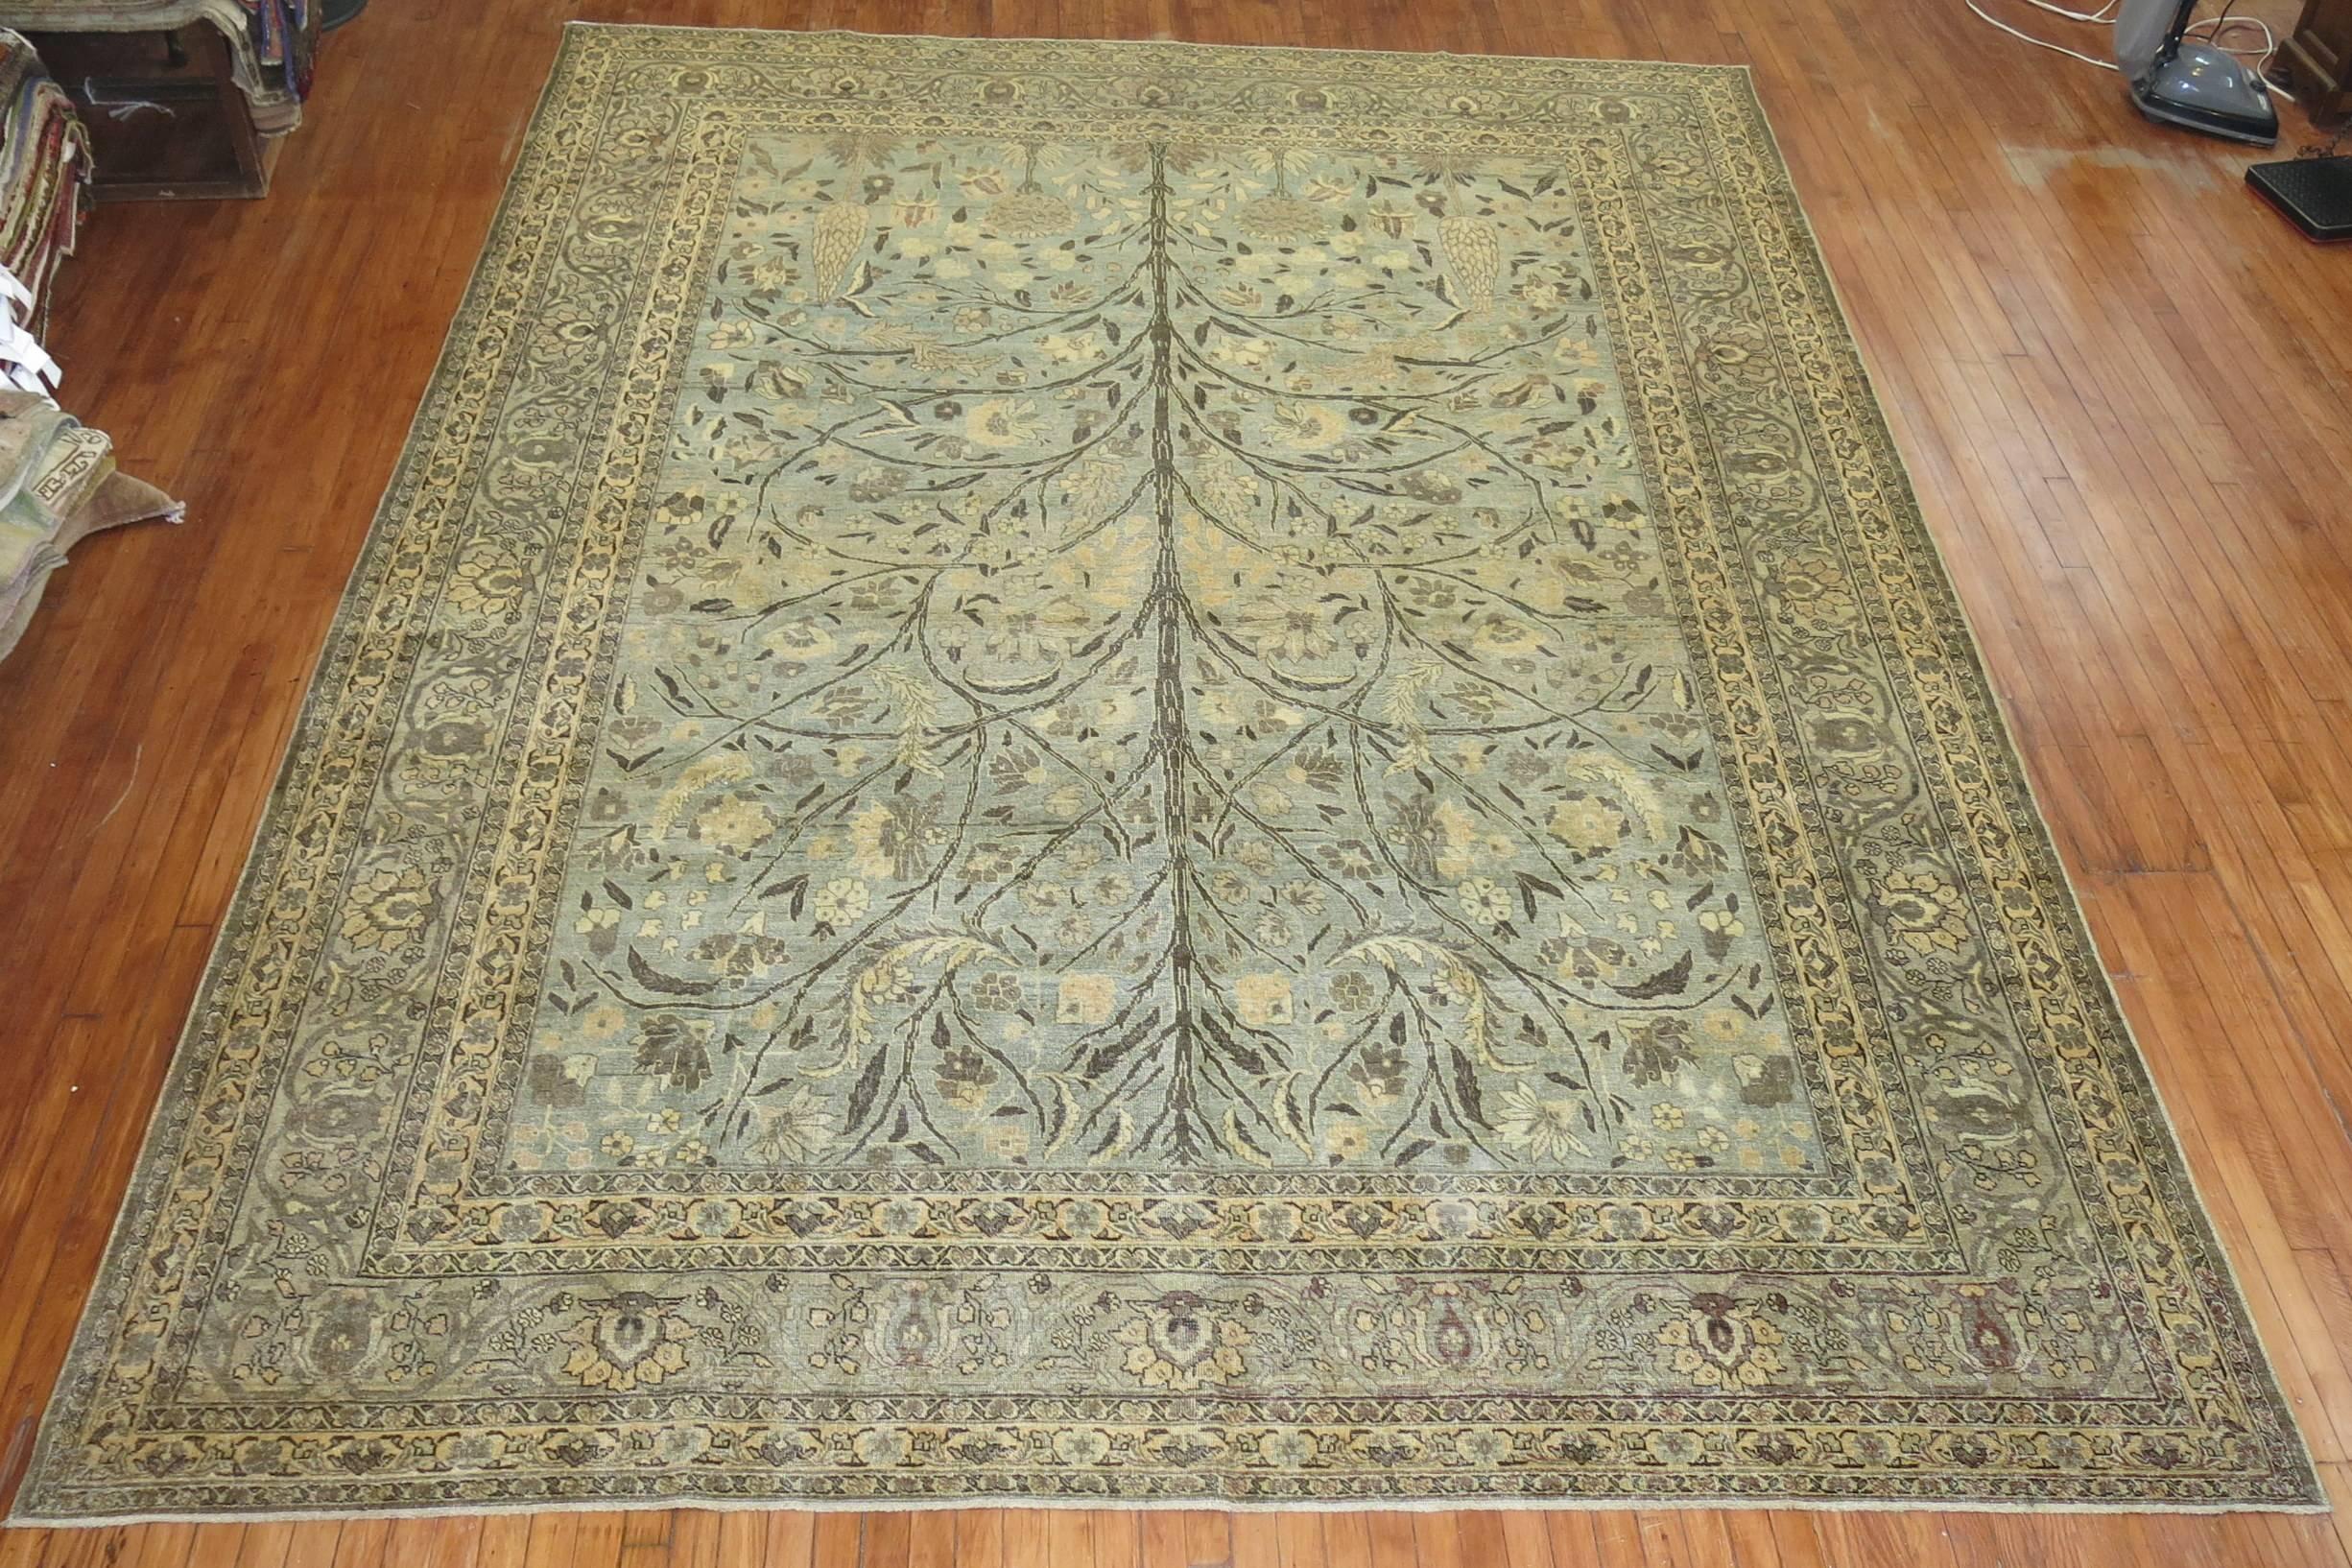 An early 20th century, Persian Tabriz with a Garden of Paradise Design in sea foam colors.